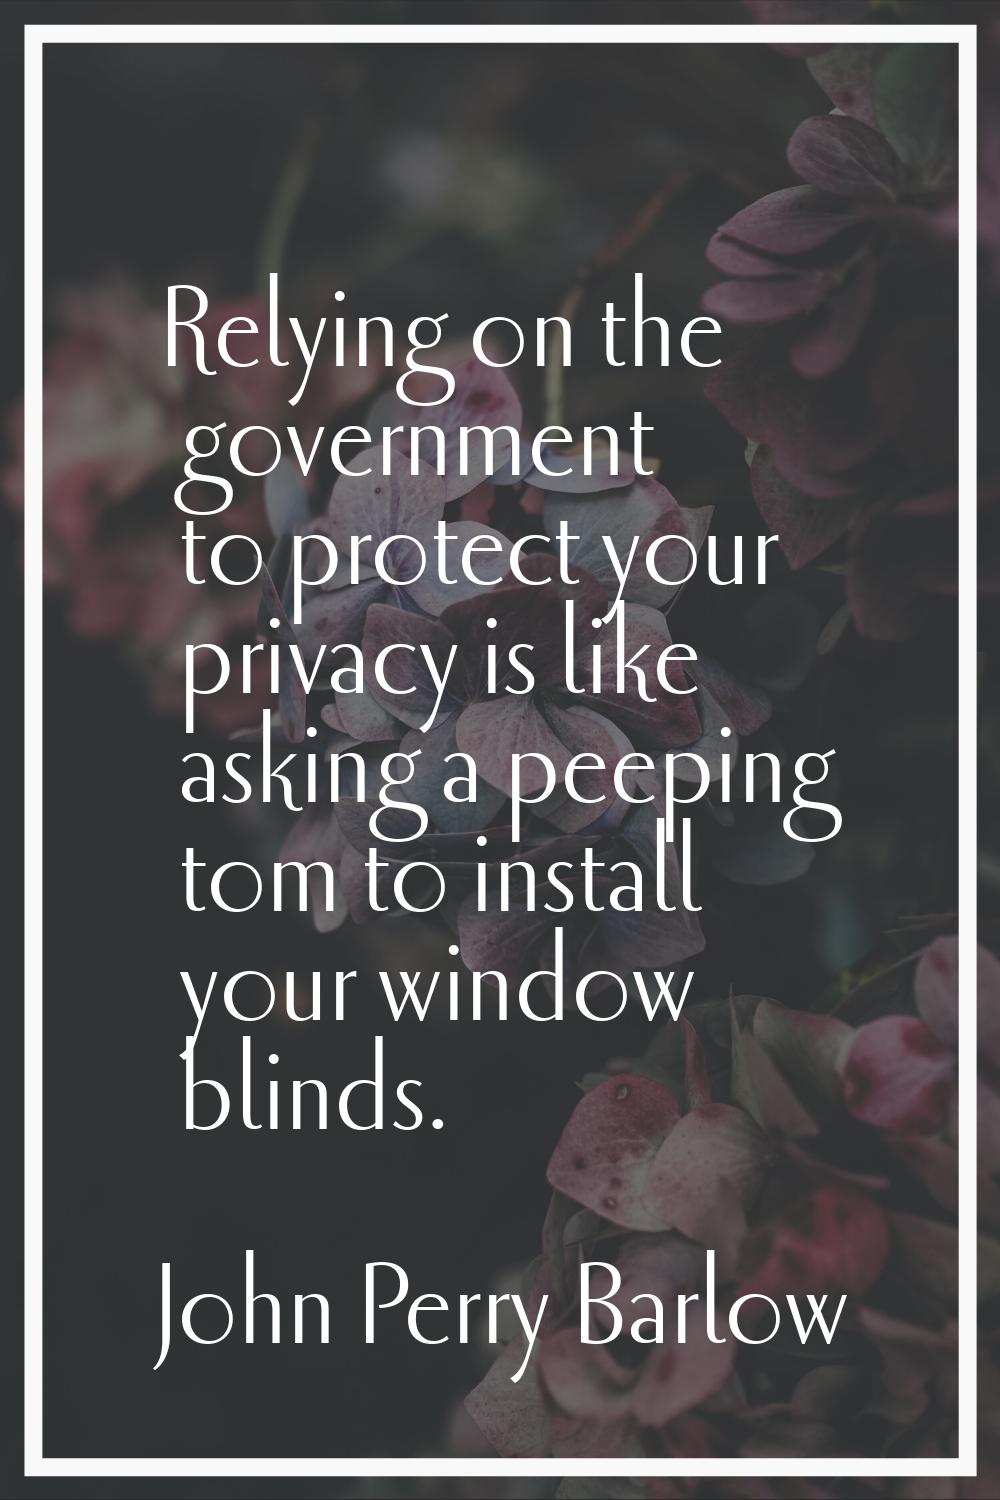 Relying on the government to protect your privacy is like asking a peeping tom to install your wind